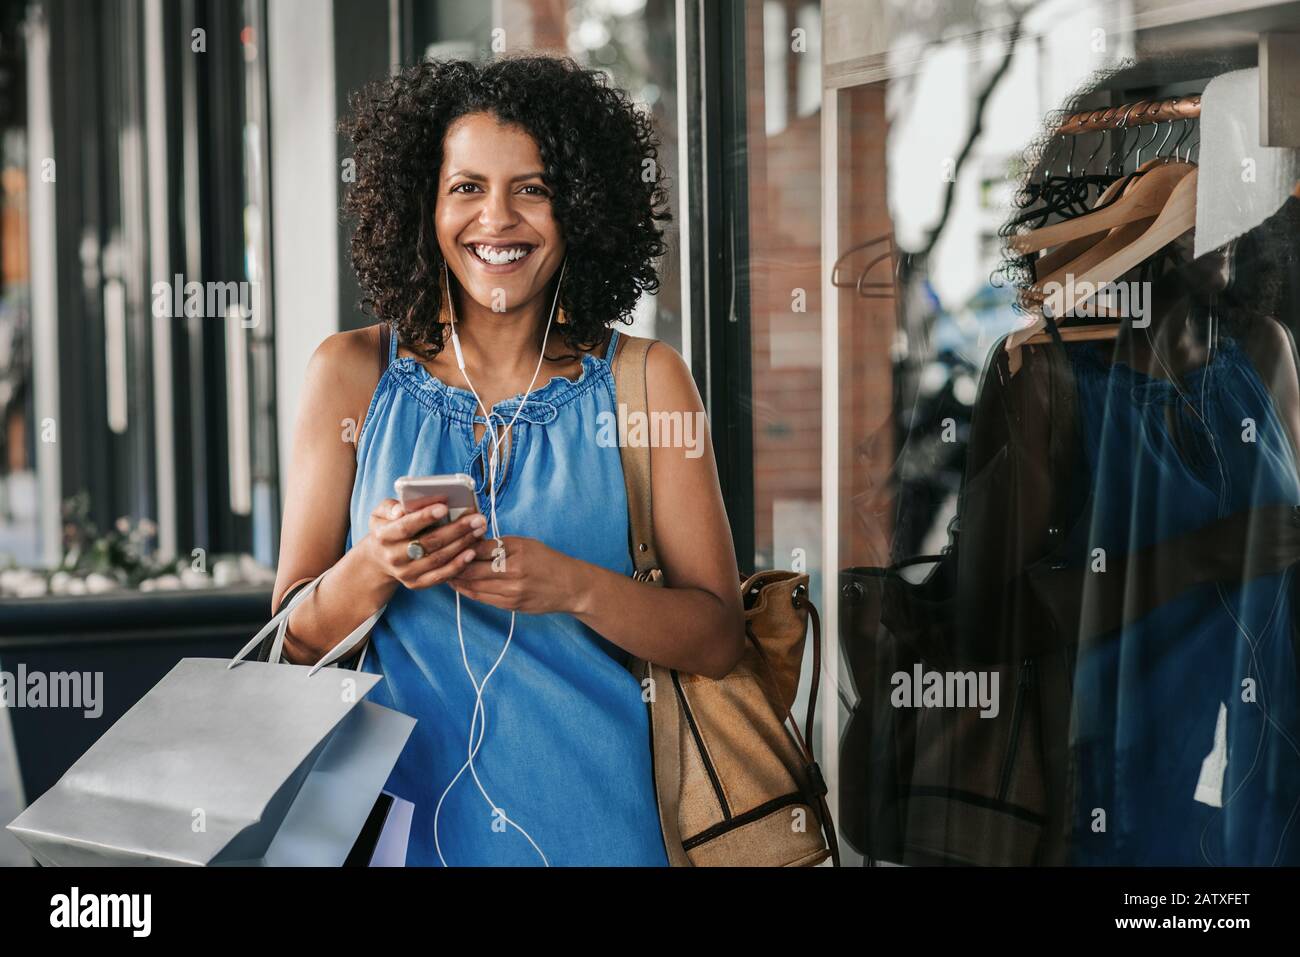 Smiling woman listening to music while out clothes shopping Stock Photo